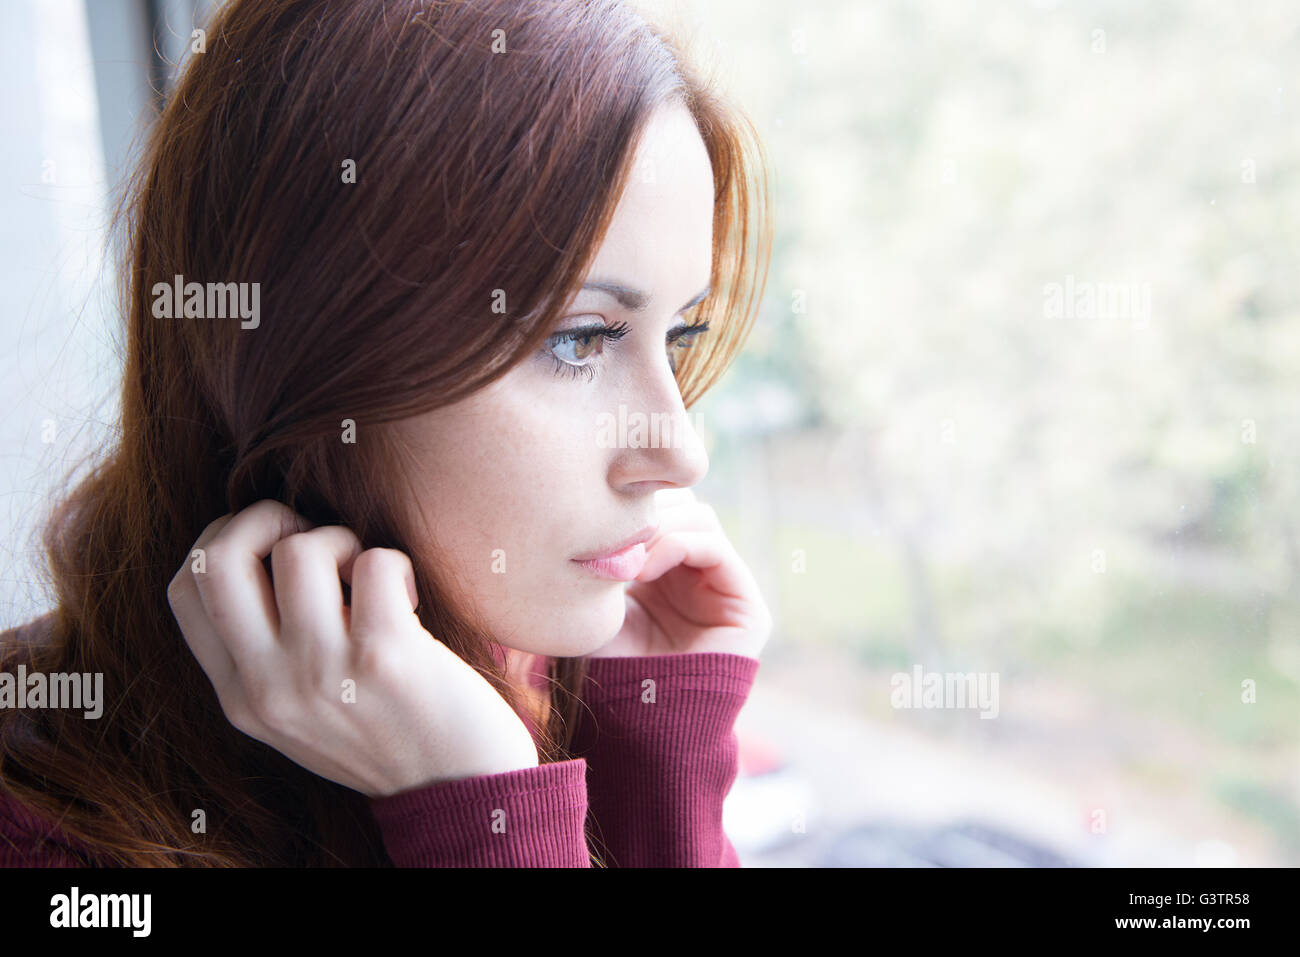 Portrait of an attractive young woman sitting by a window. Stock Photo